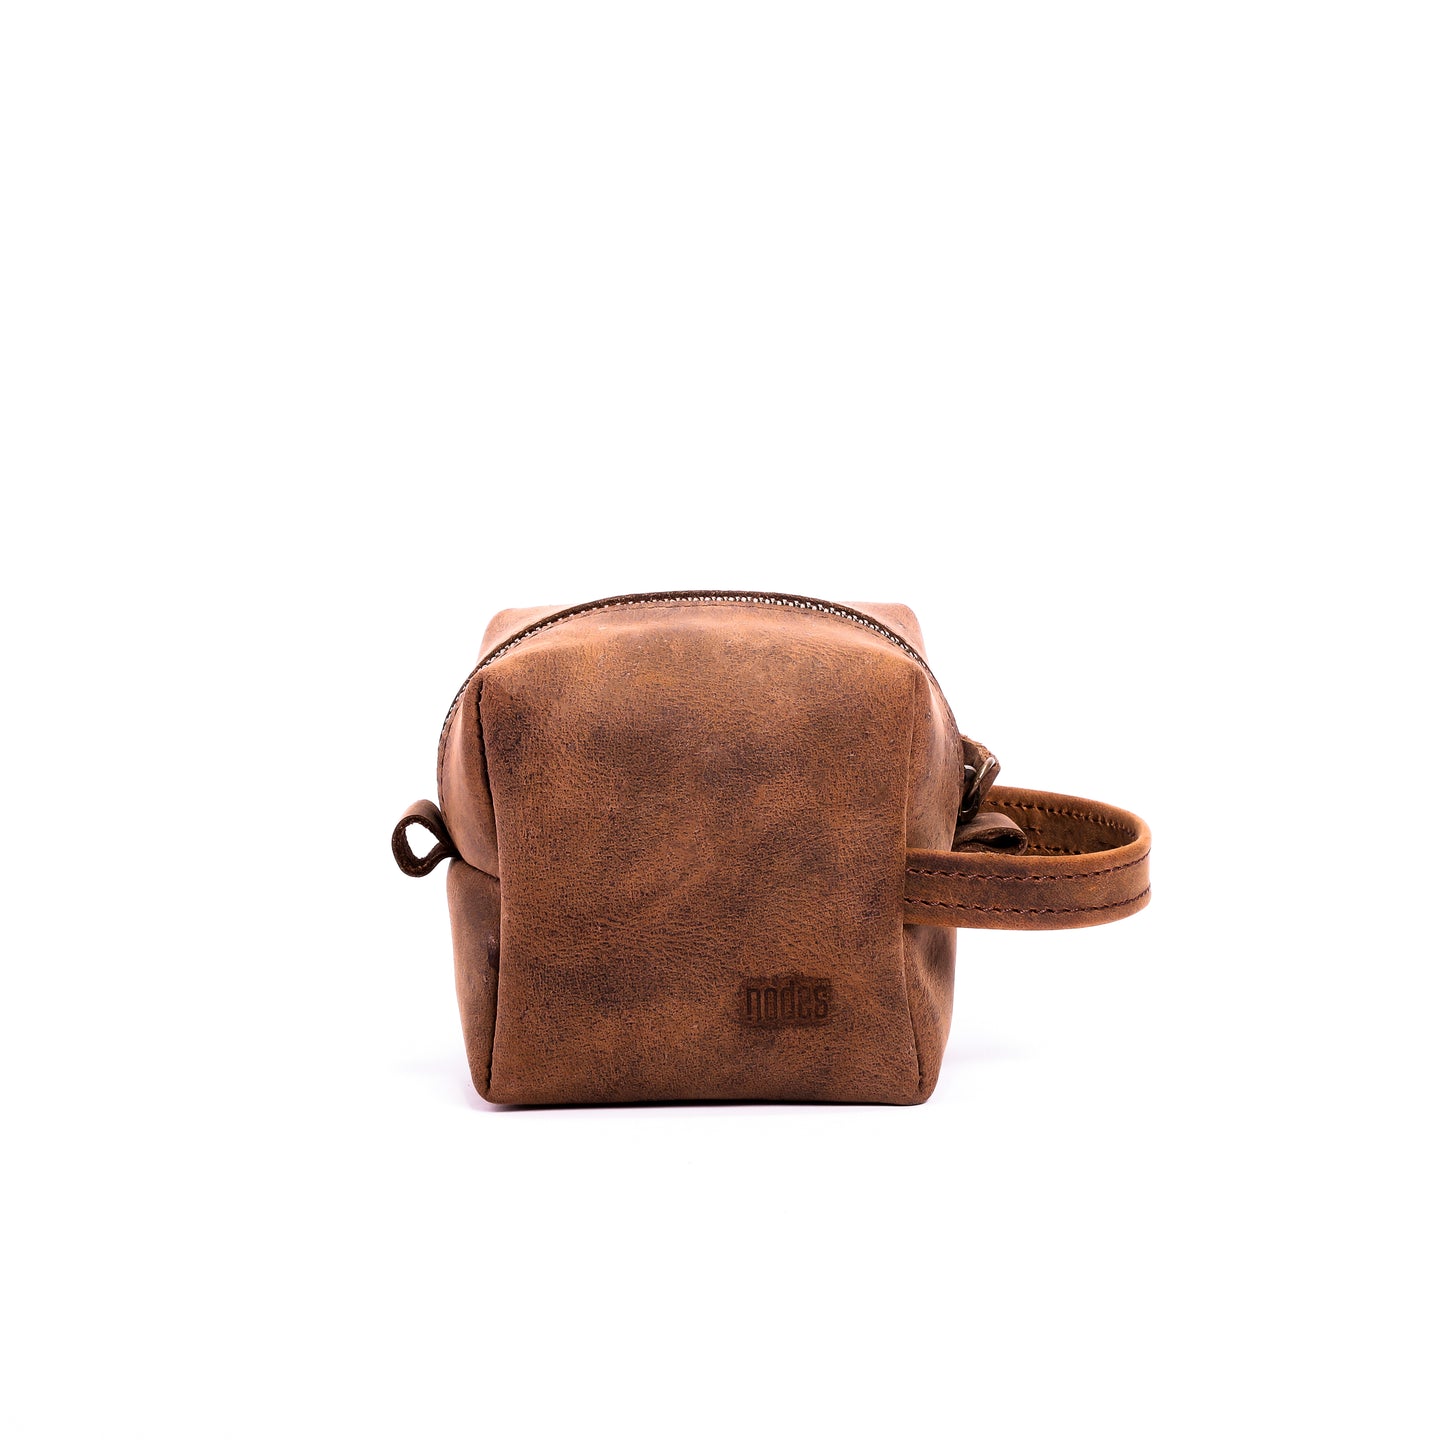 a smallest brown leather toiletry pouch with one big compartment with zipper for travel needs , travel pouch, vanity pouch, leather bag, Genuine leather bag, toiletry pouch.